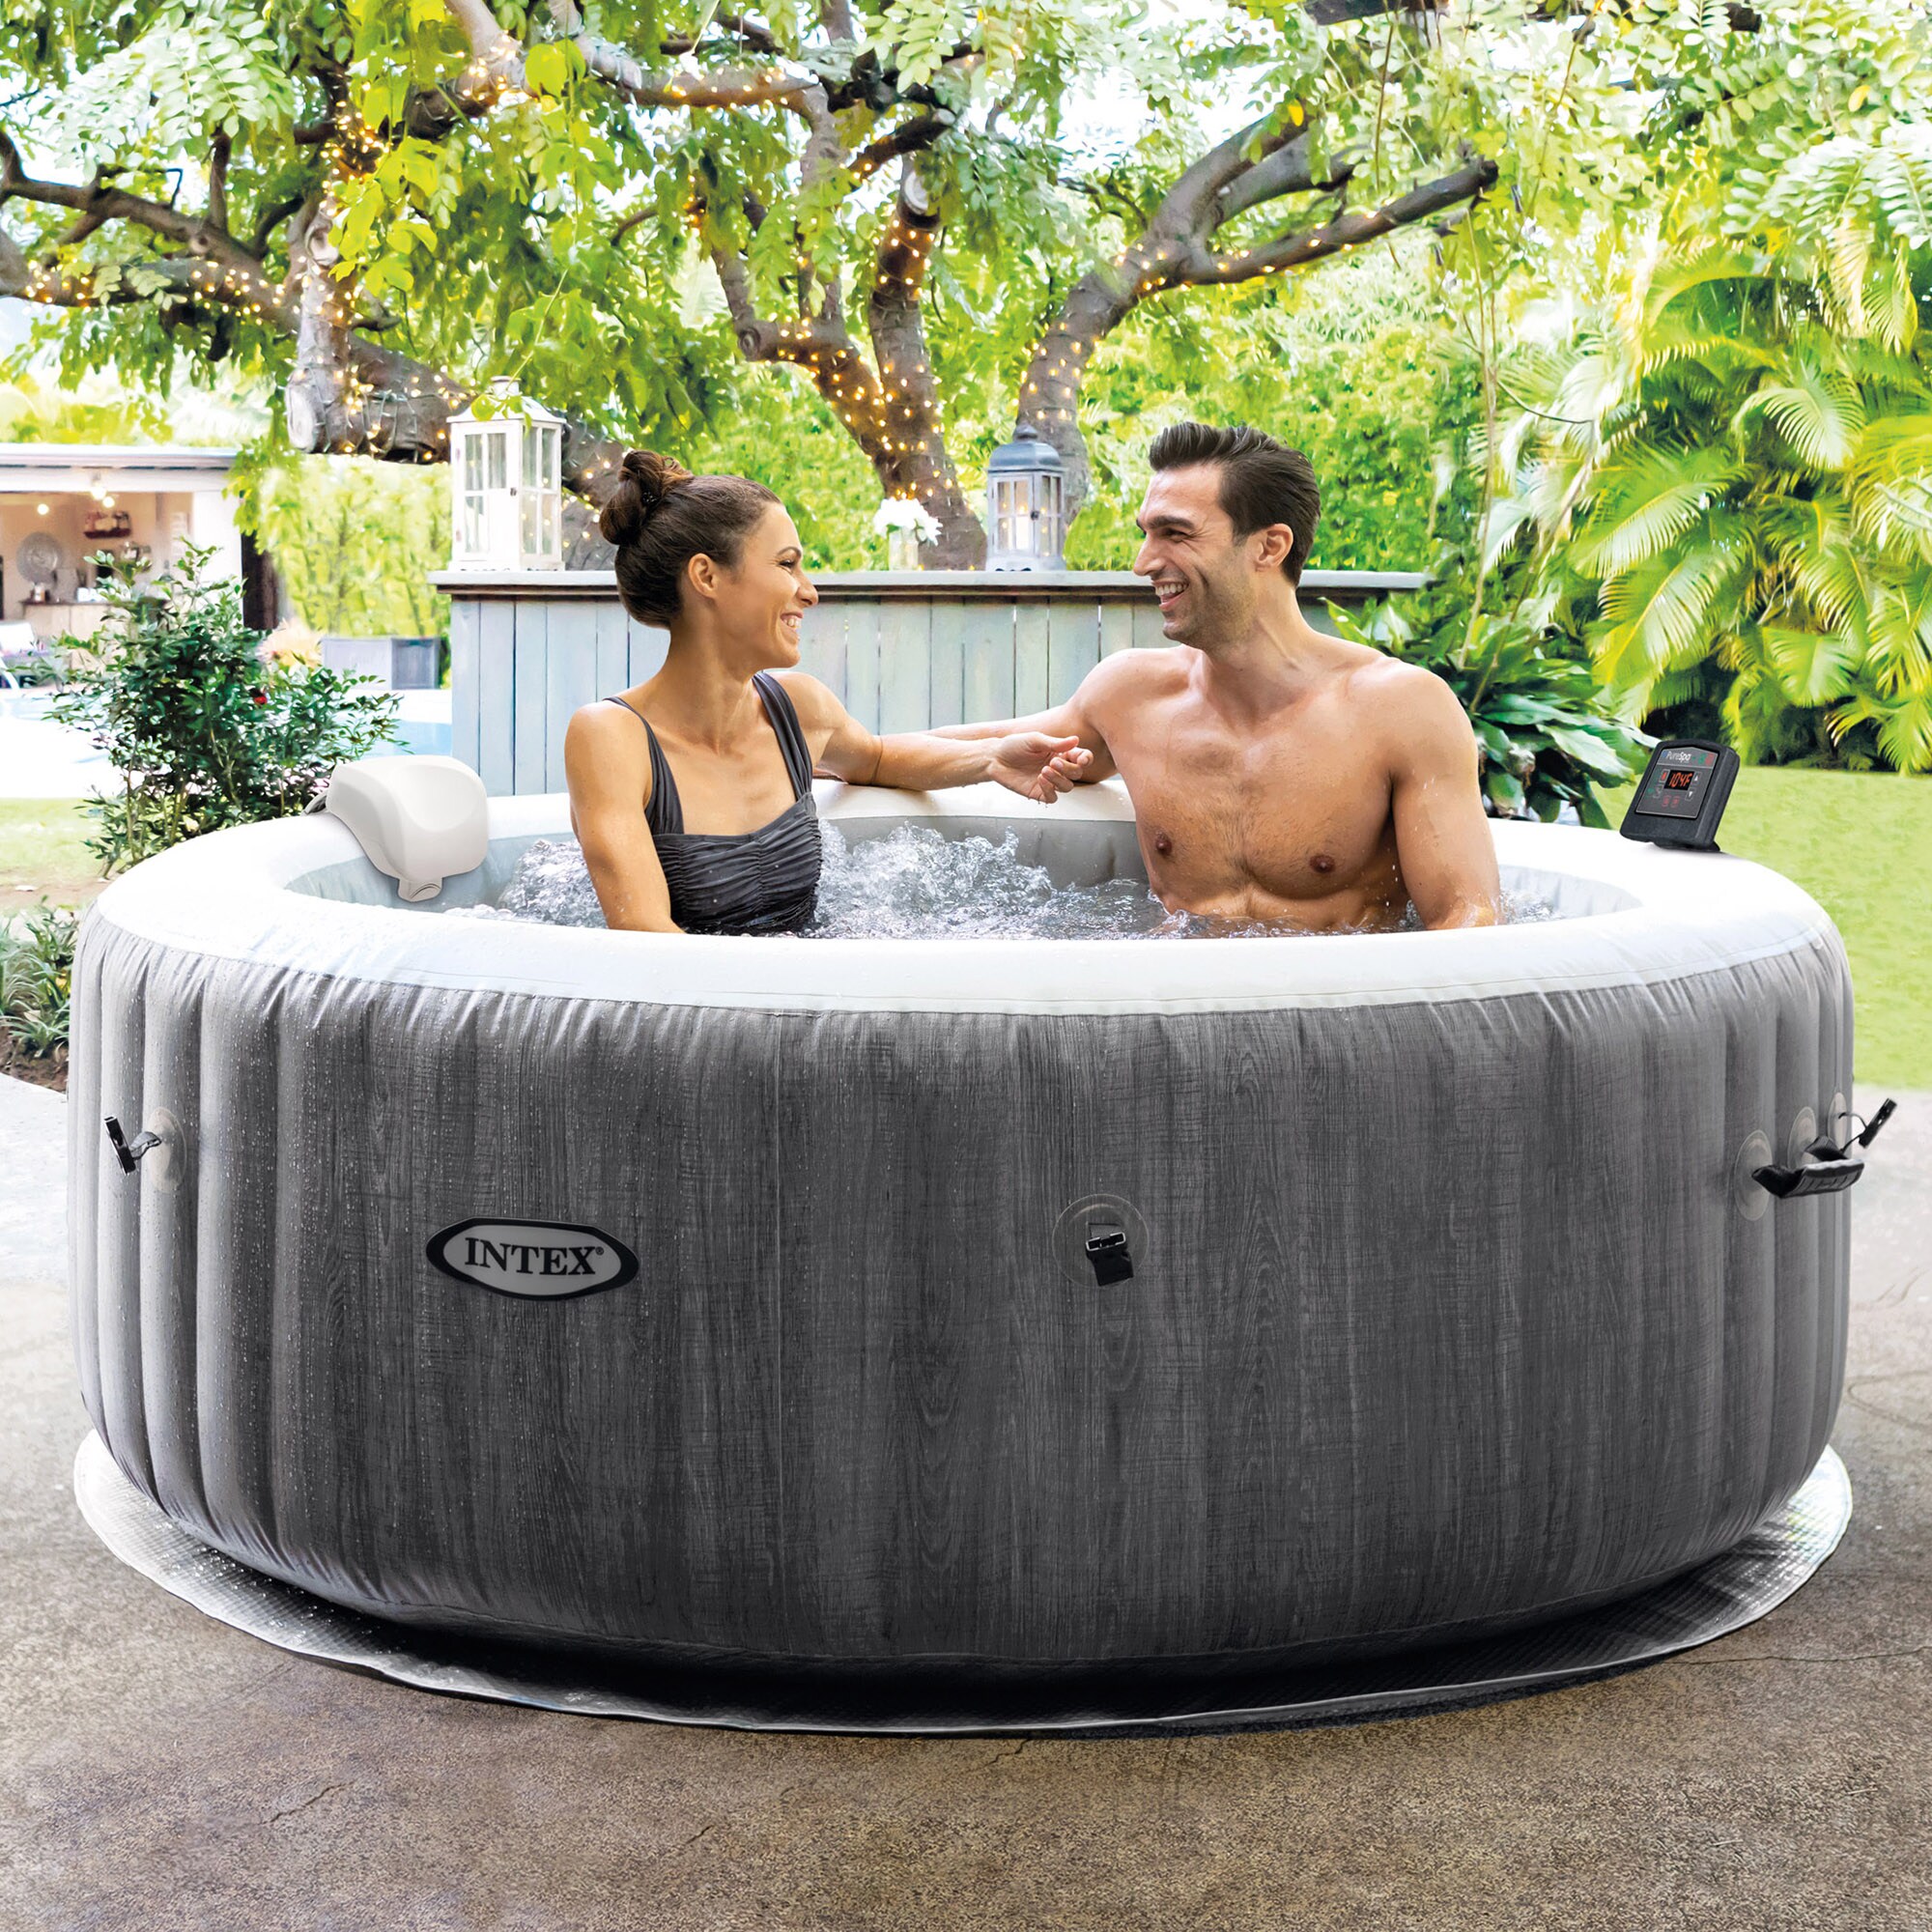 Coleman Saluspa 4 Person Square Portable Inflatable Outdoor Hot Tub Spa &  Intex Purespa Attachable Cup Holder And Refreshment Tray Accessory : Target